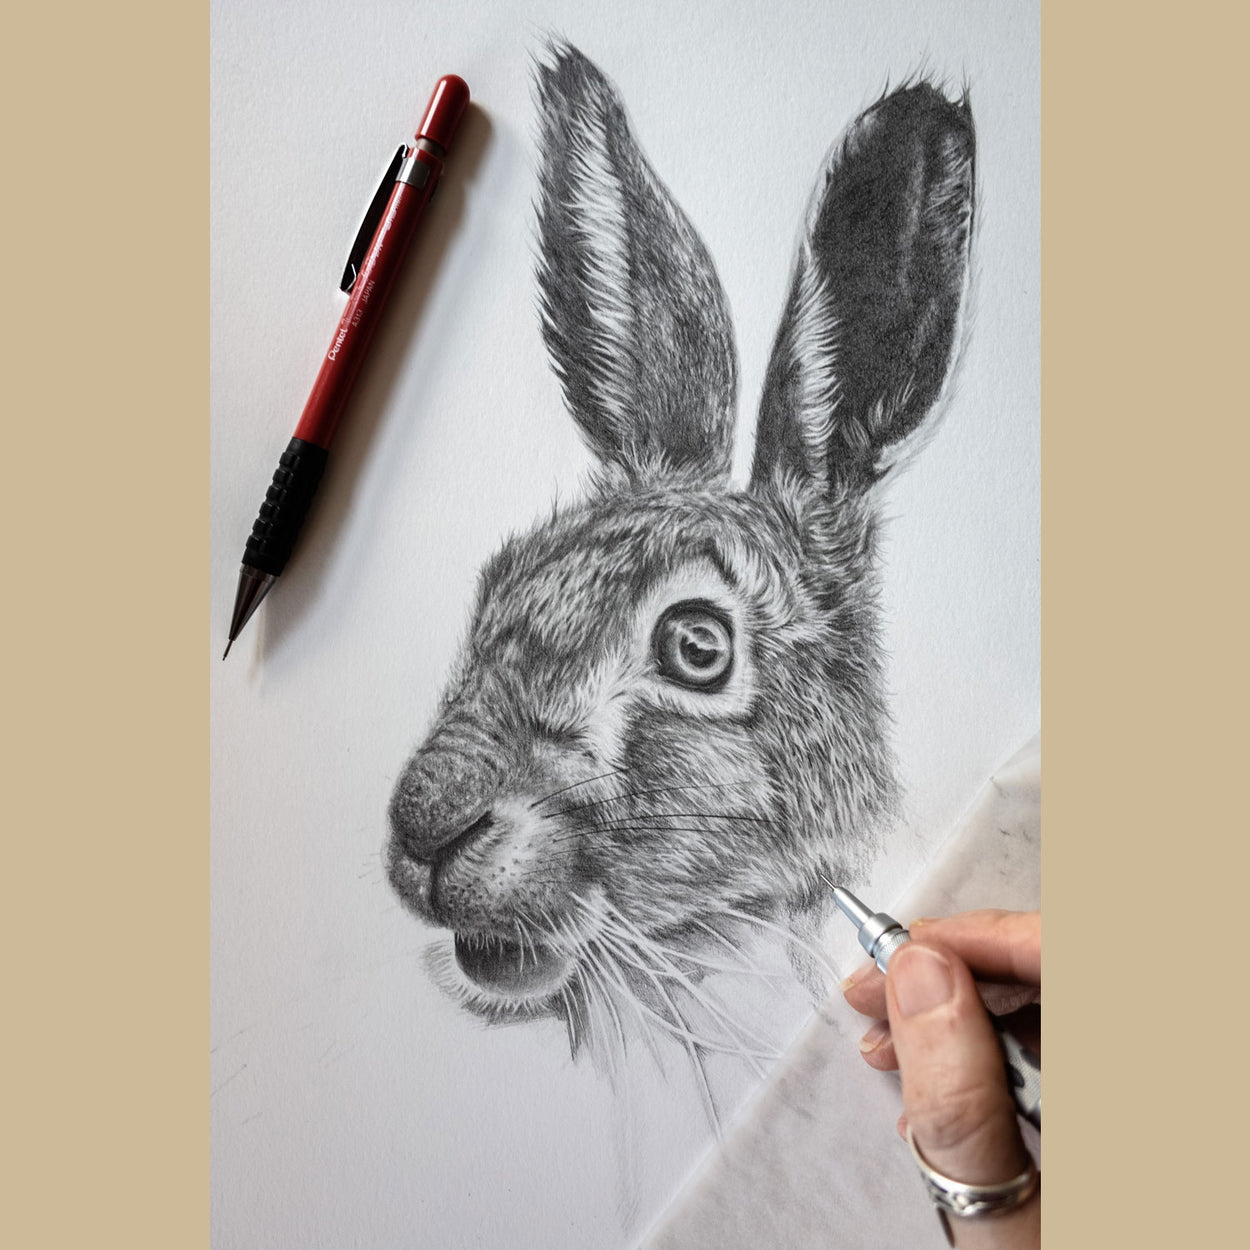 Hare Pencil Drawing in Progress - The Thriving Wild